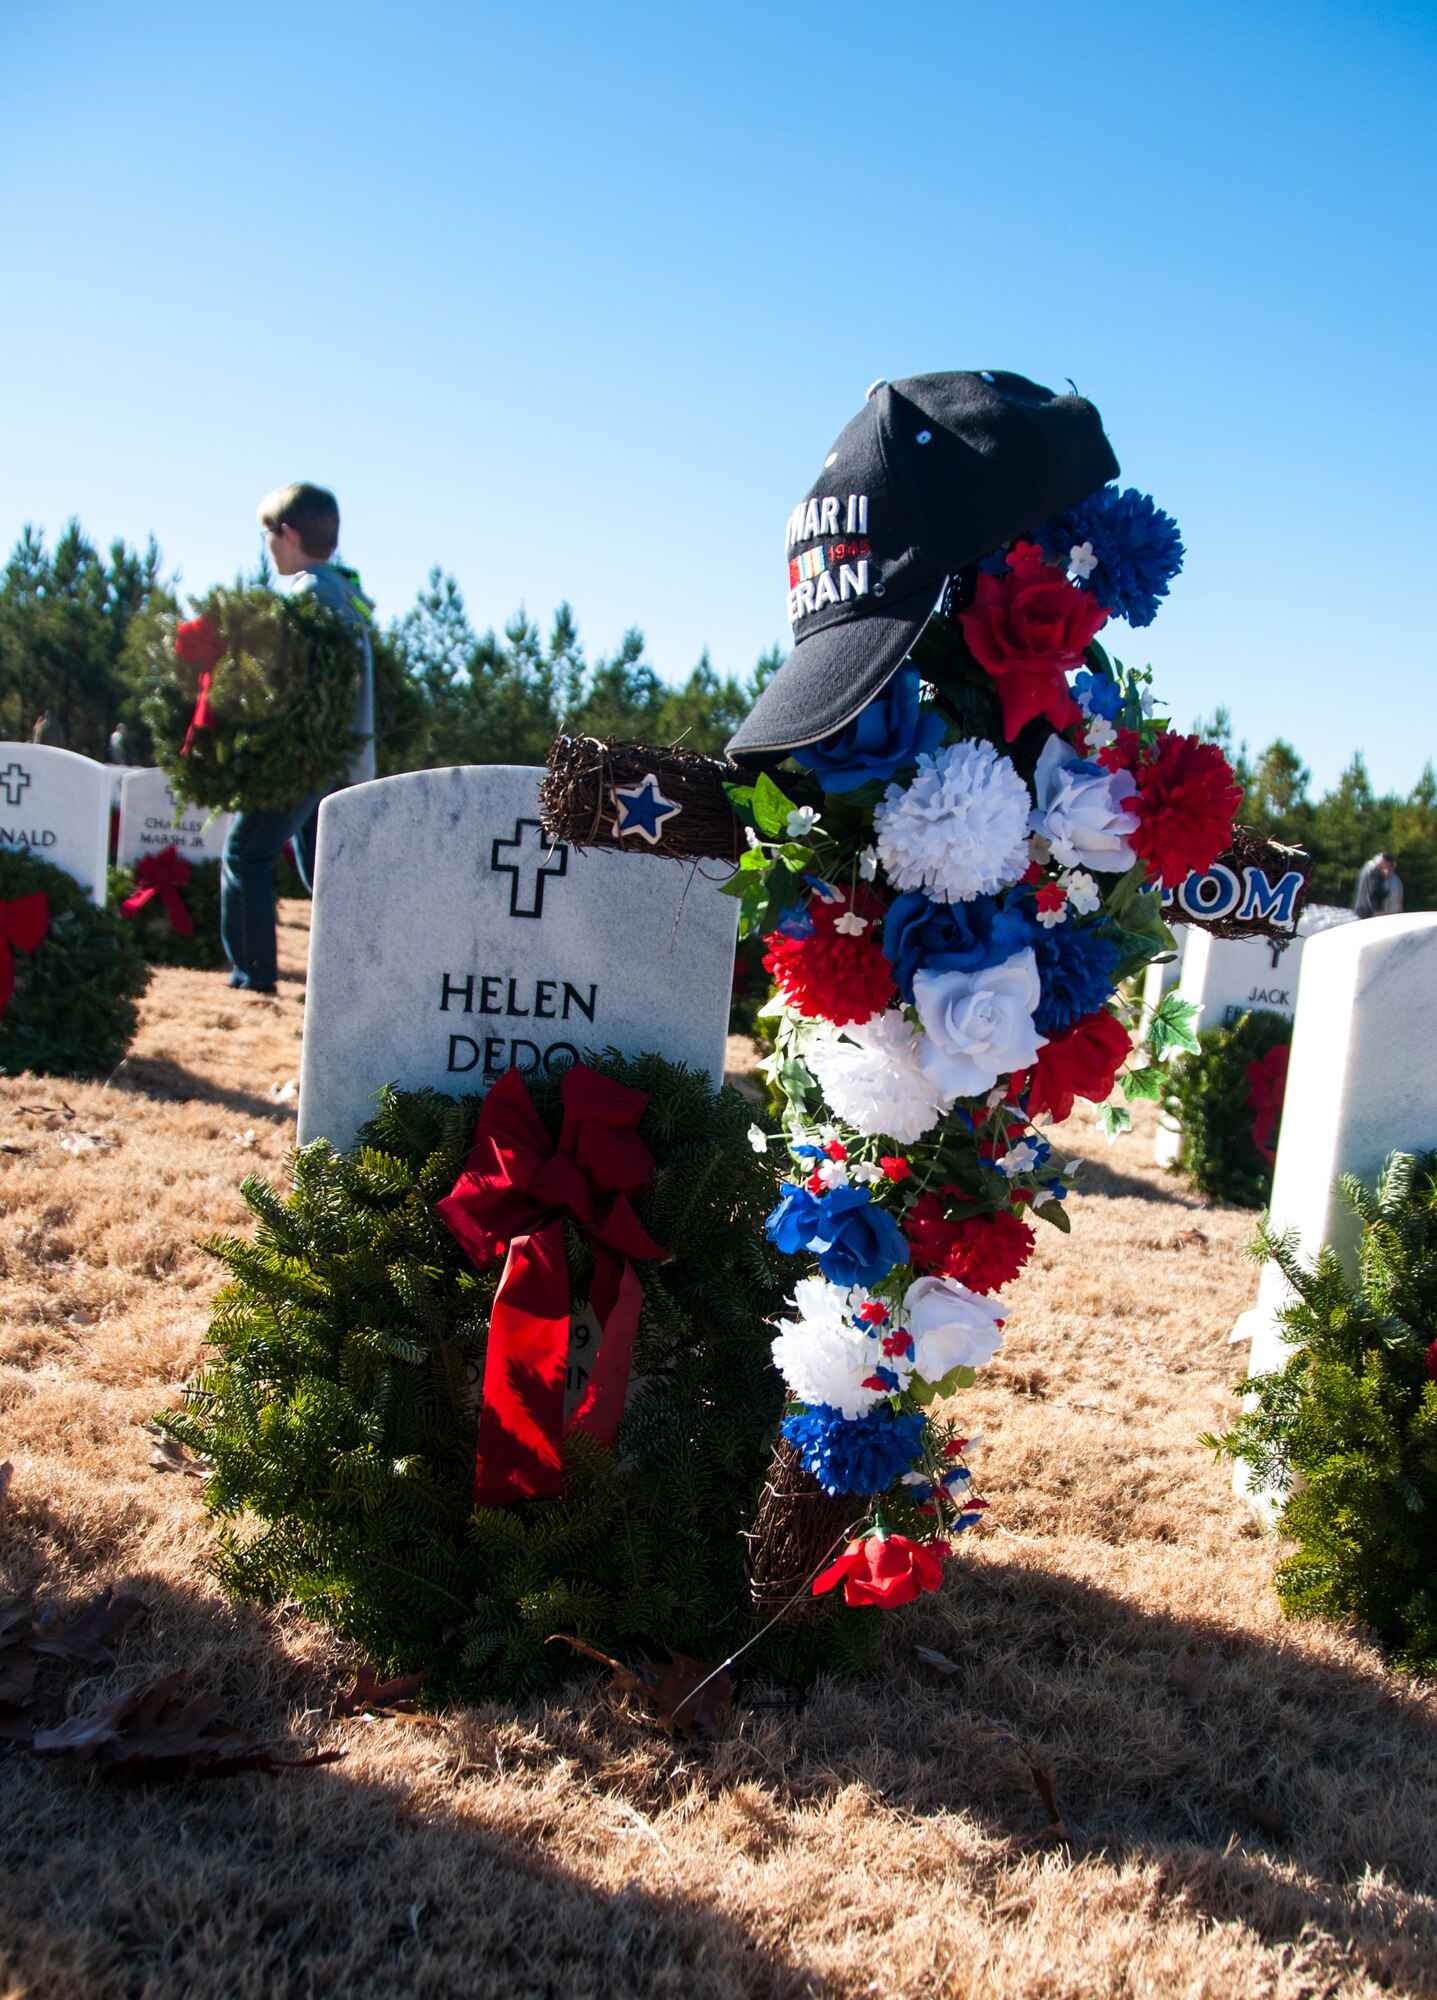 Wreaths lay on gravestones after the Wreaths Across America ceremony at Georgia National Cemetery in Canton, Ga. Dec. 13, 2014. Wreaths Across America occurs the second Saturday of December every year. (U.S. Air Force photo/Senior Airman Daniel Phelps)